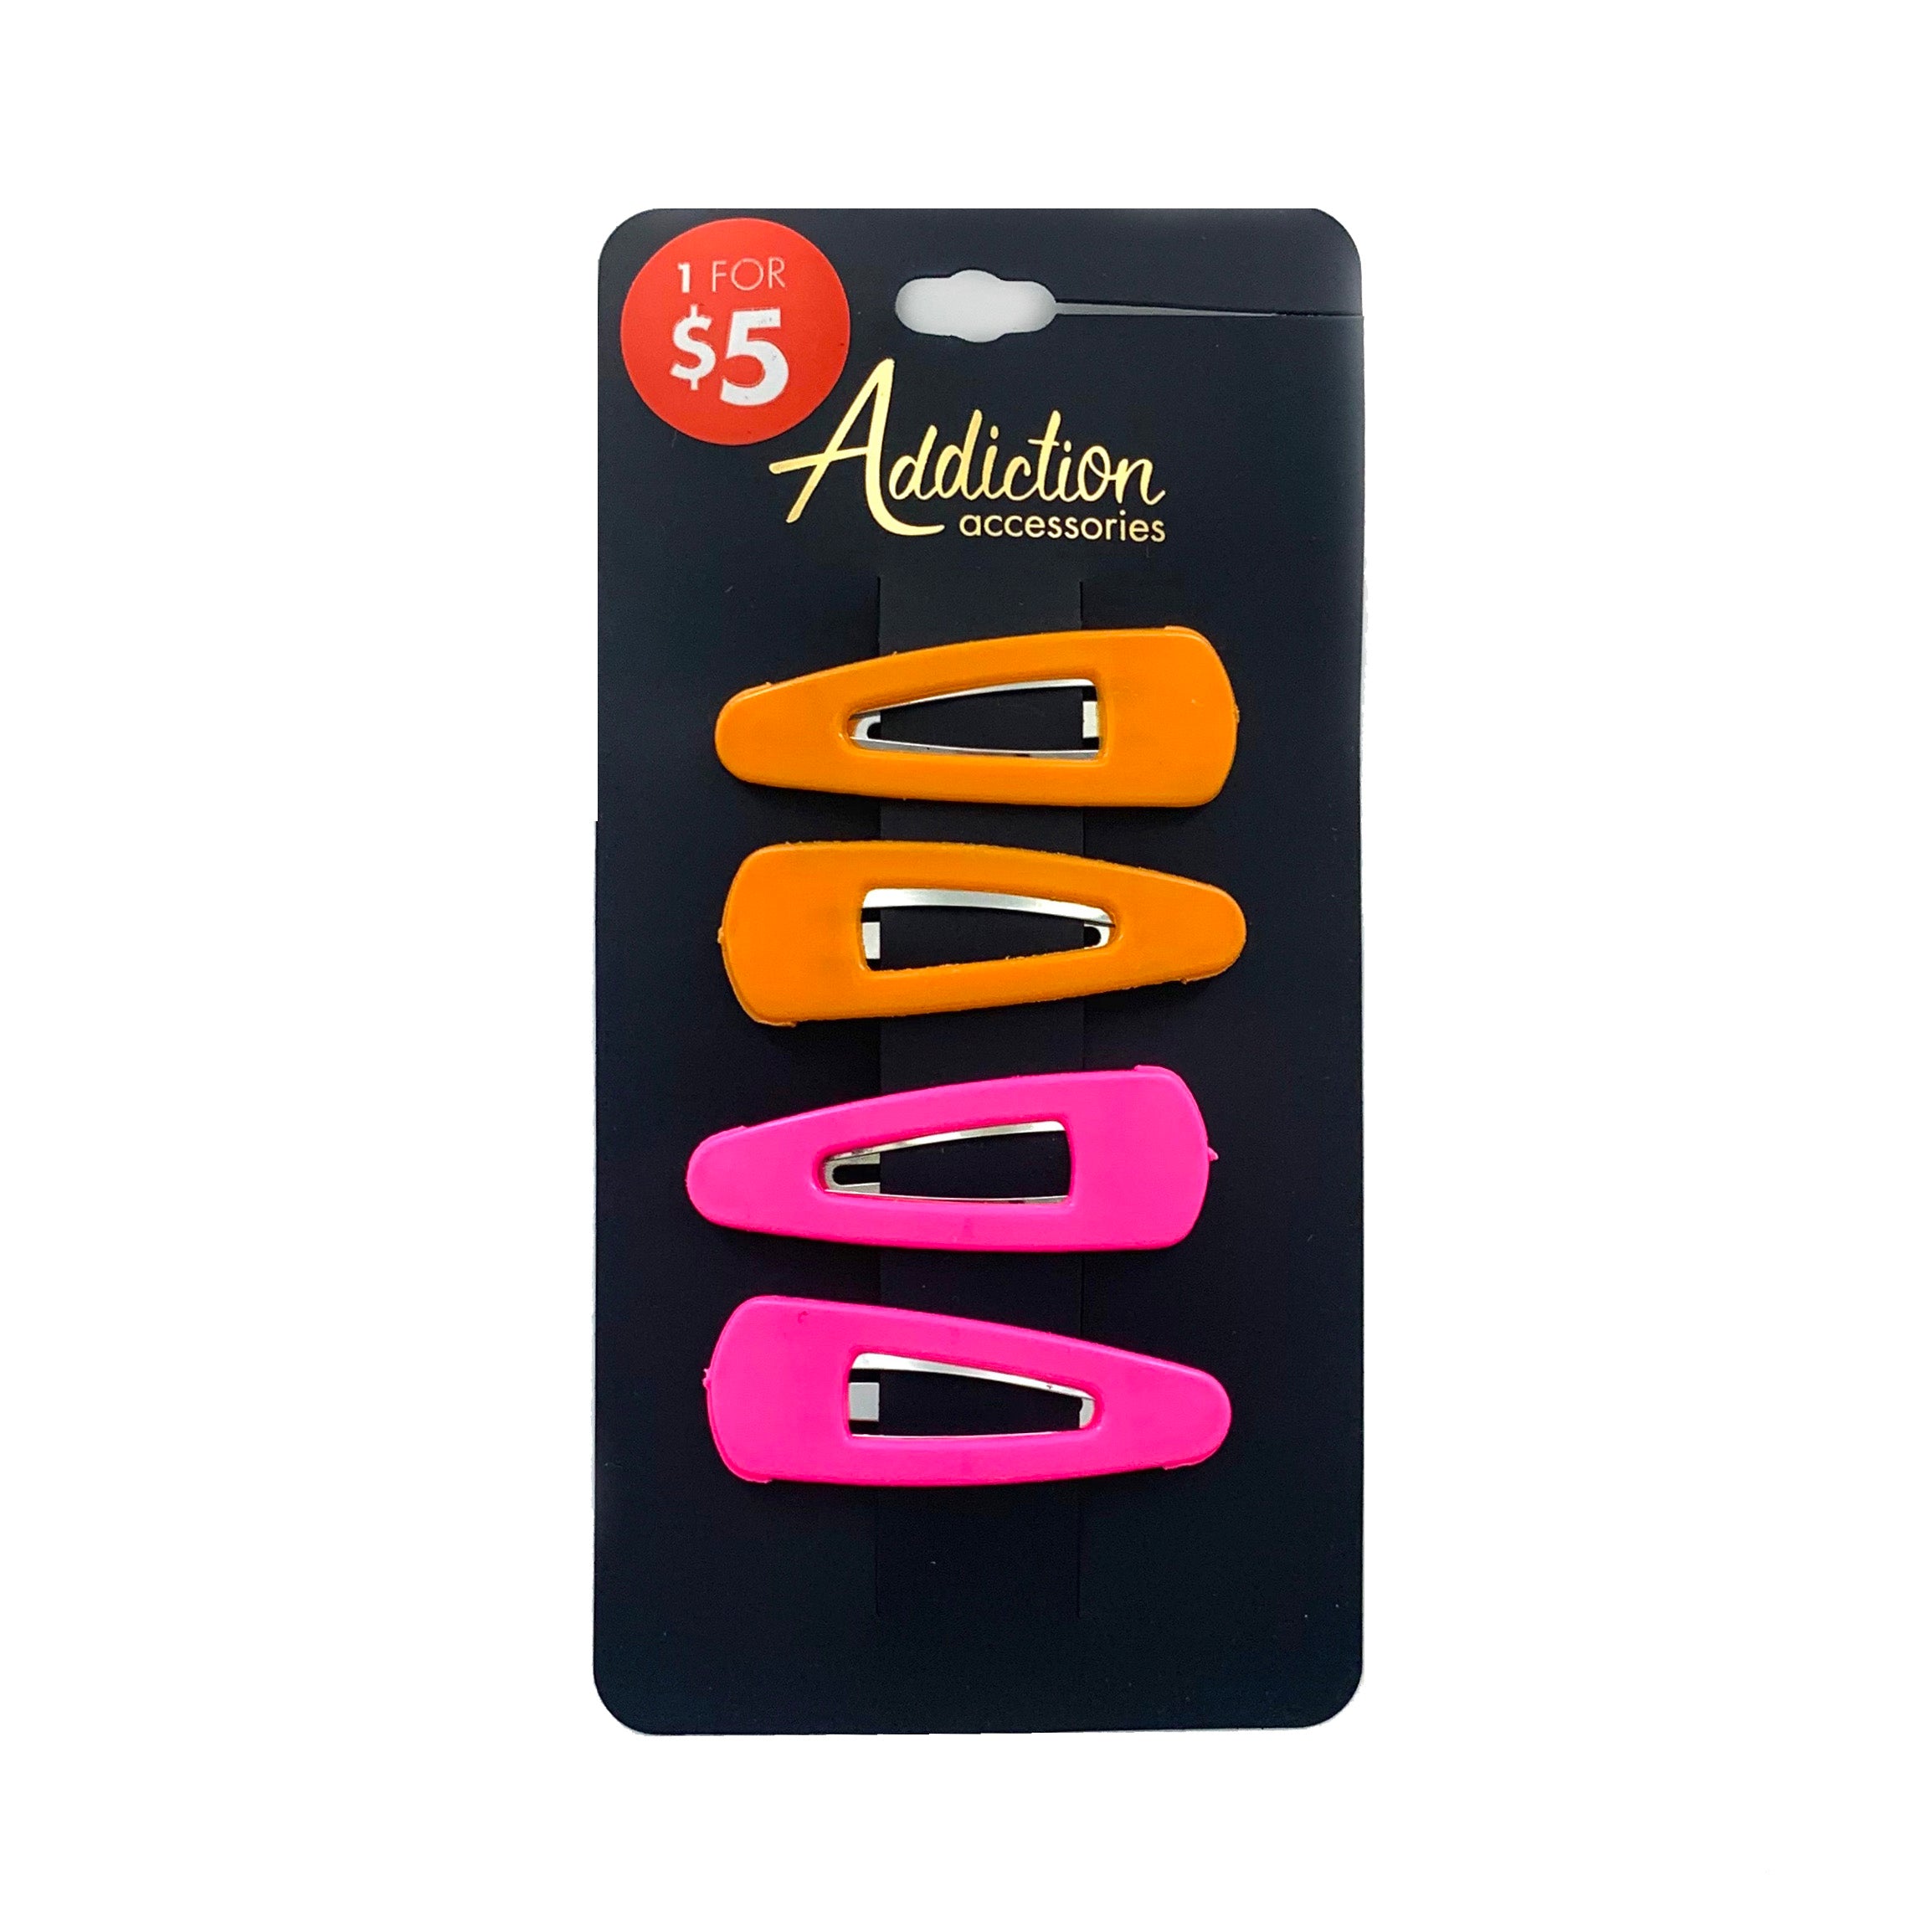 Orange and Pink plastic coated hair clips